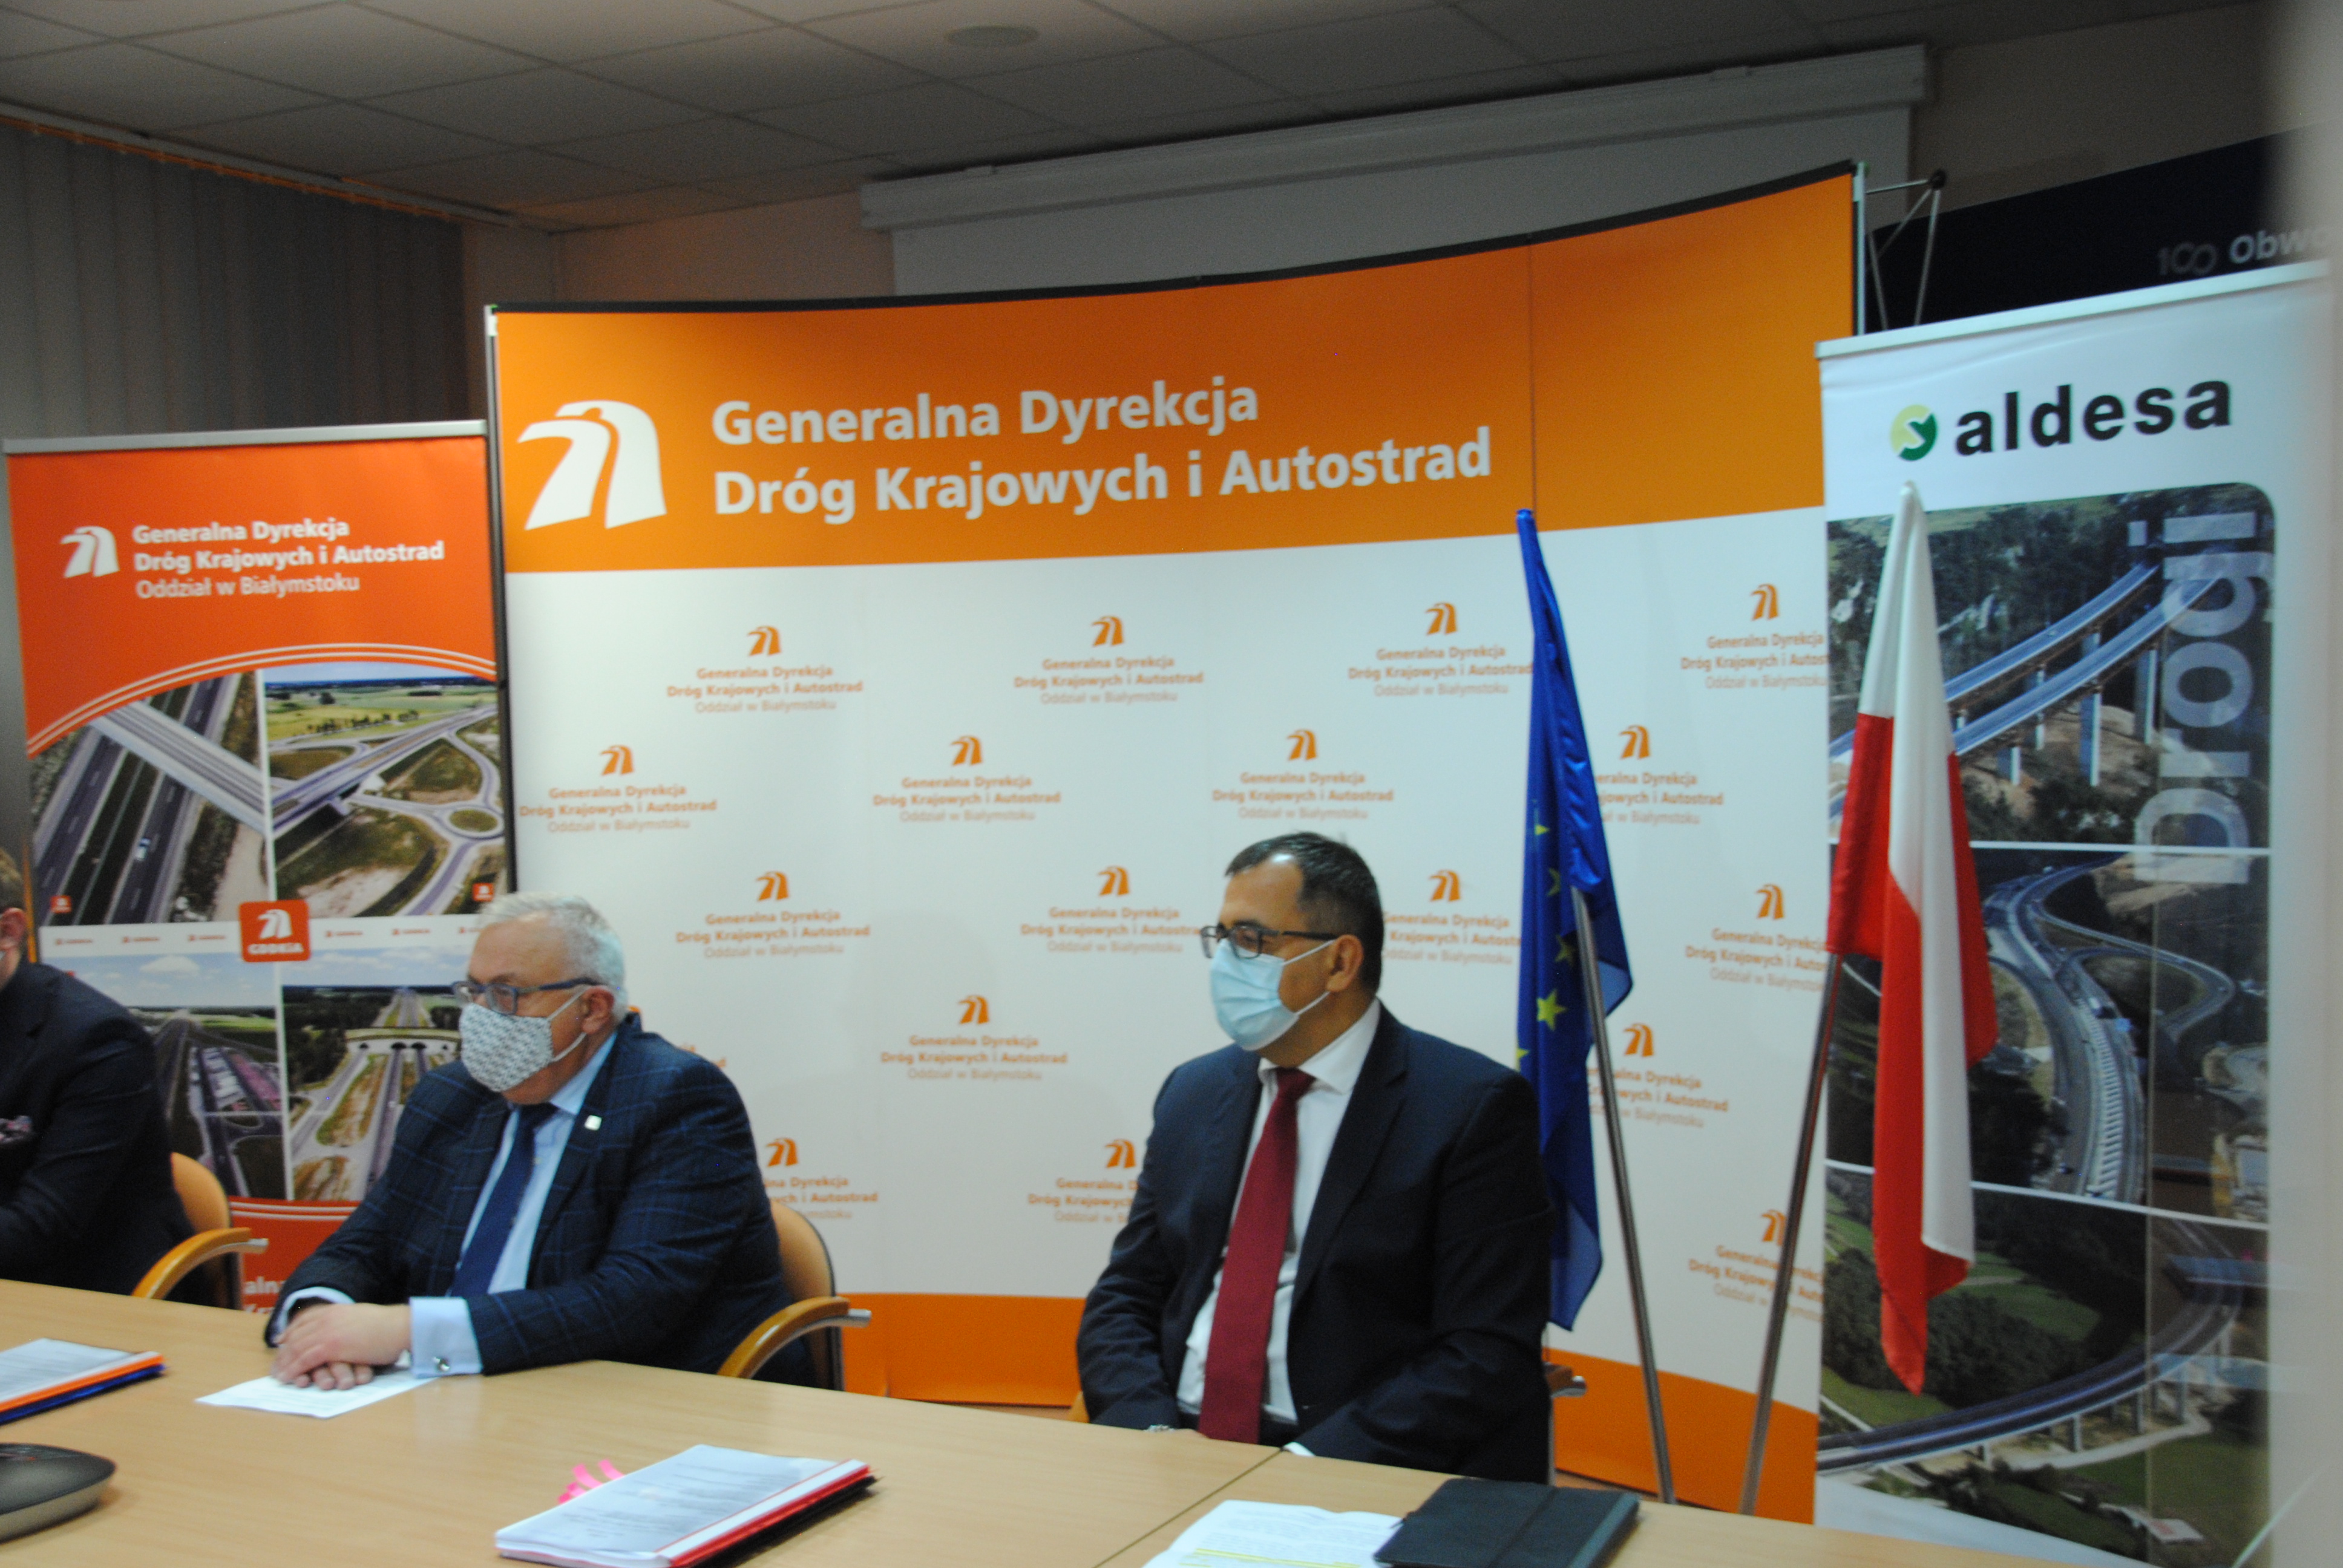 Aldesa - Aldesa has signed a contract with GDDKiA for the construction of a section of the S19 express road Księżyno-Białystok Południe